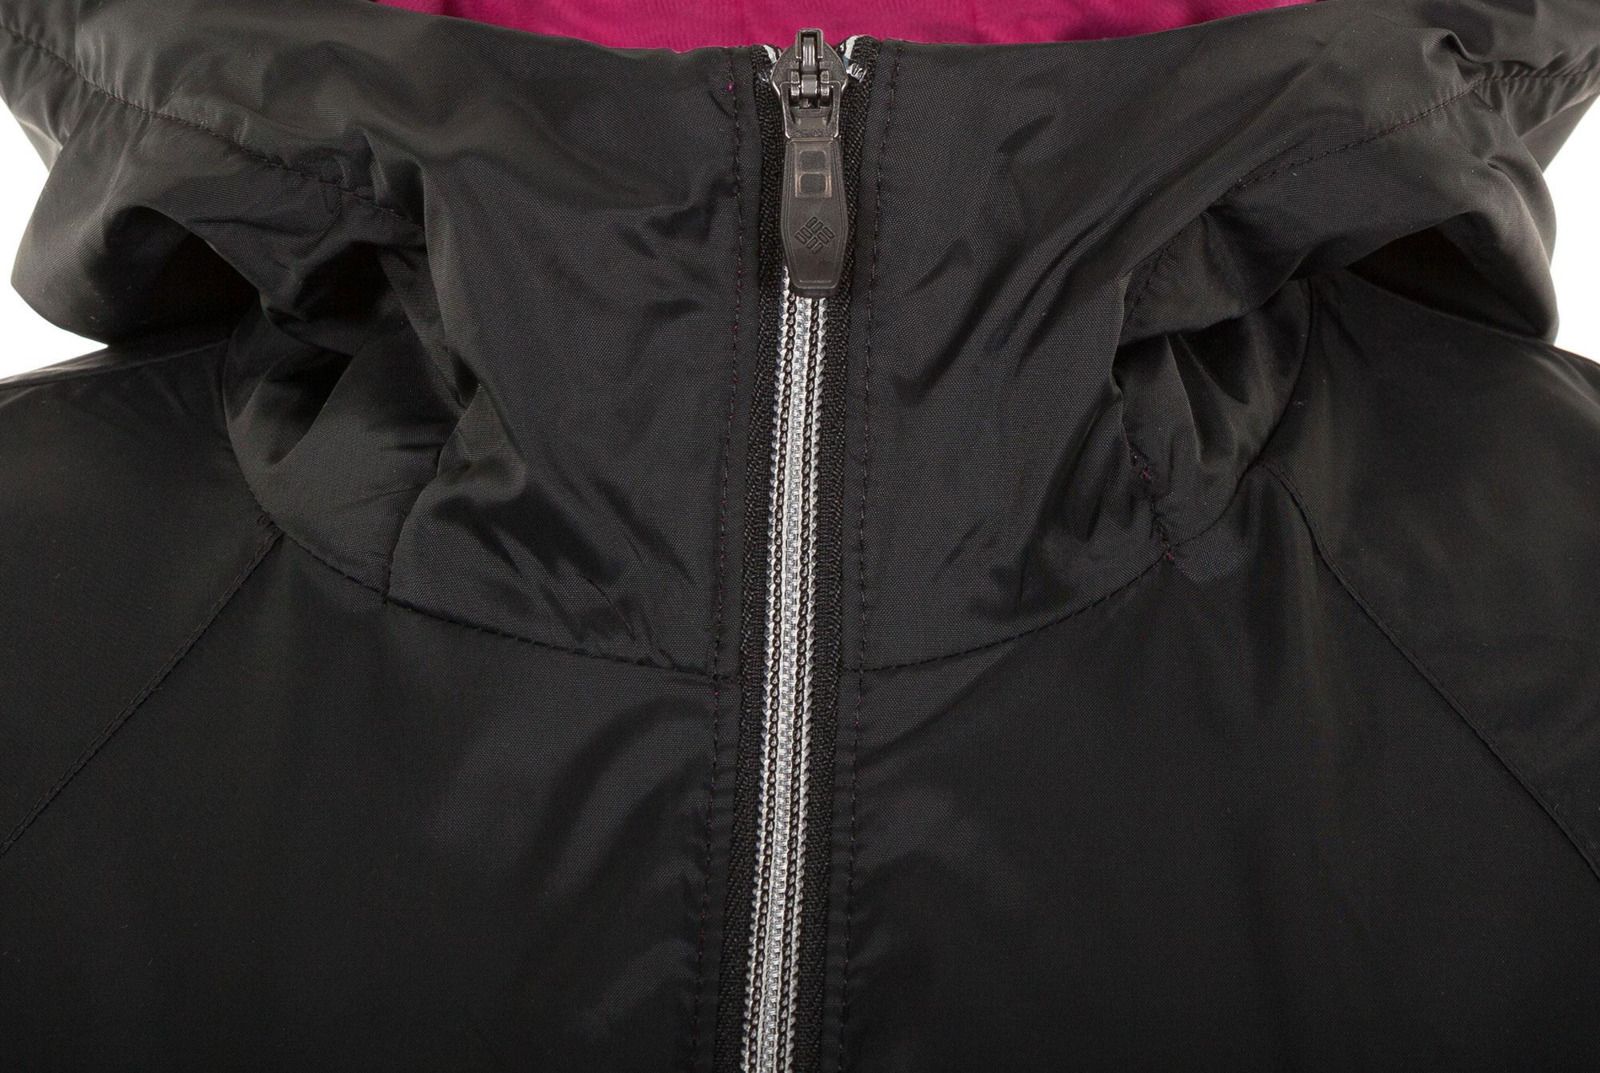   Columbia Switchback Lined Long Jacket, : . 1771941-013.  M (46)